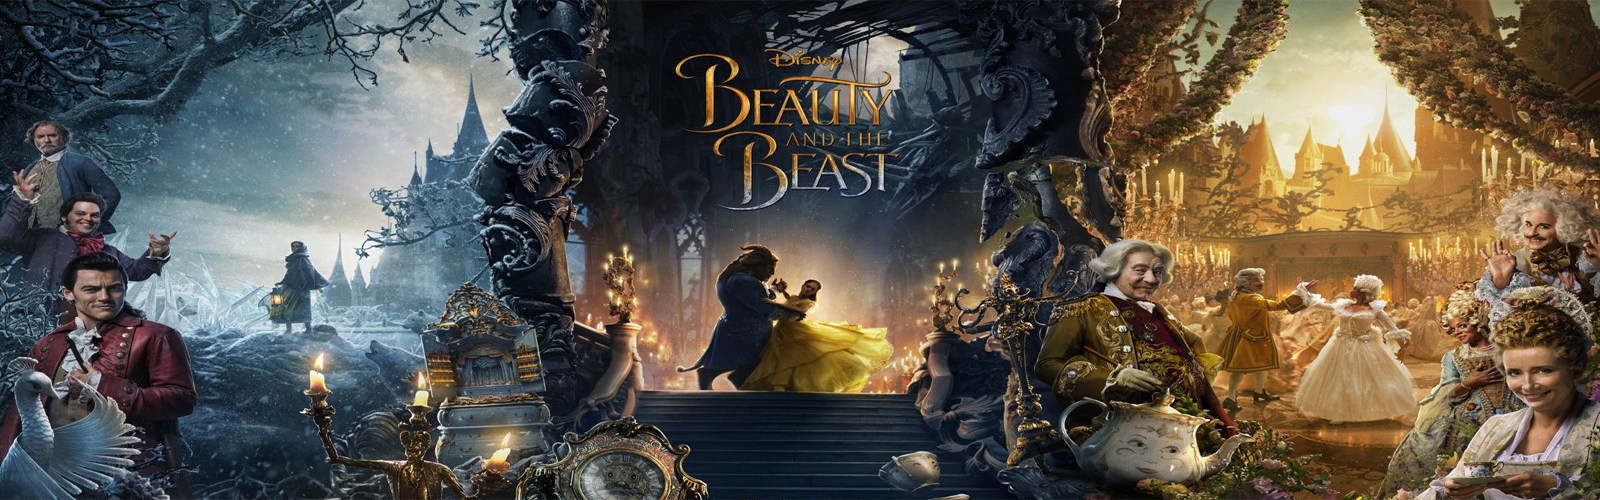 ´Beauty´ stays on top, ´Rangers´ shows box-office power